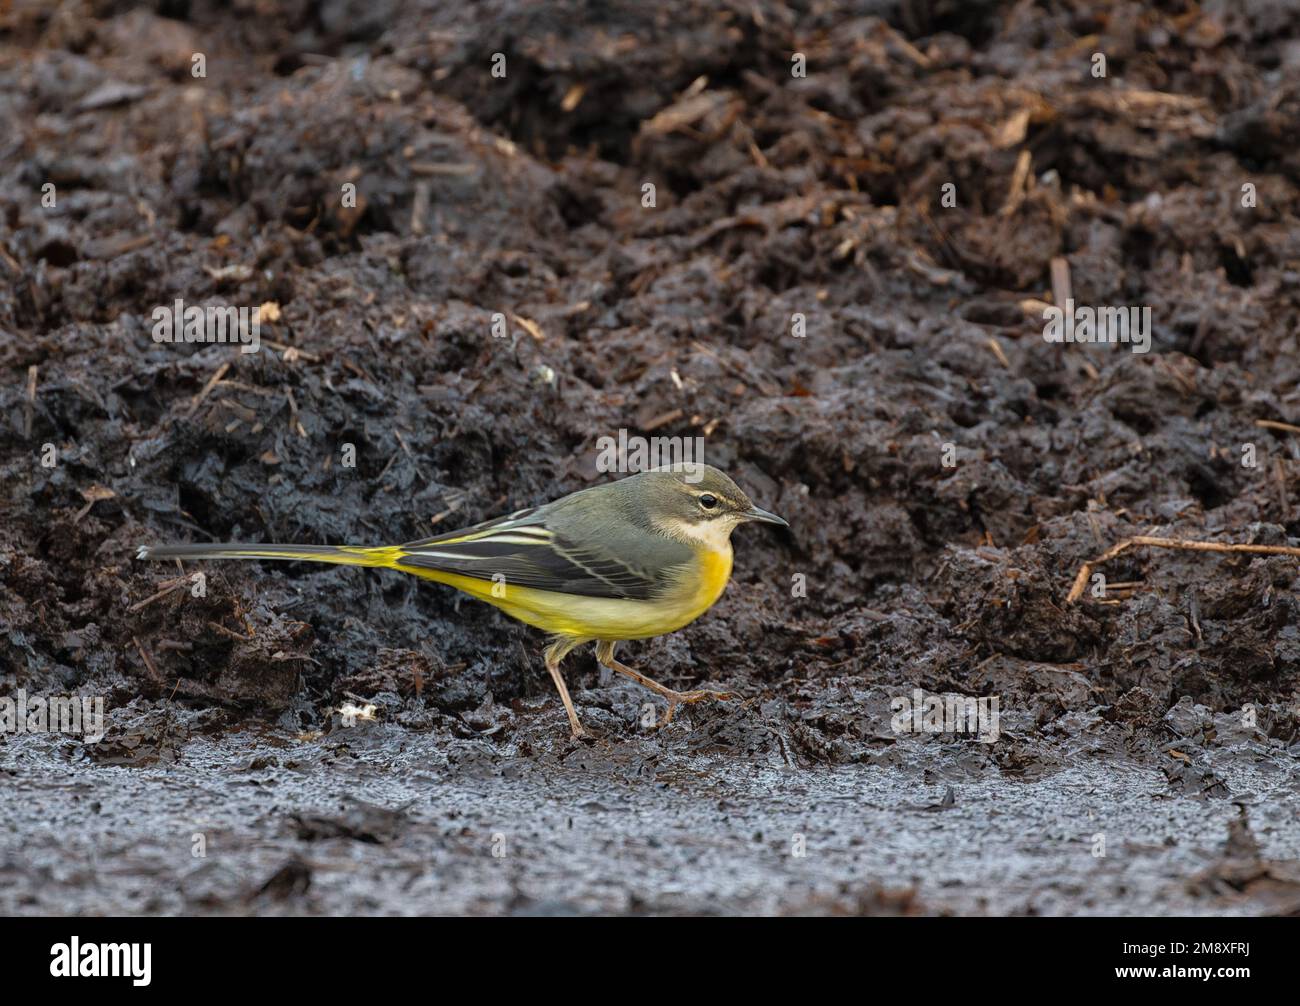 Grey Wagtail Motacilla cinerea searching along a muck heap for food items on a North Norfolk farm, UK Stock Photo